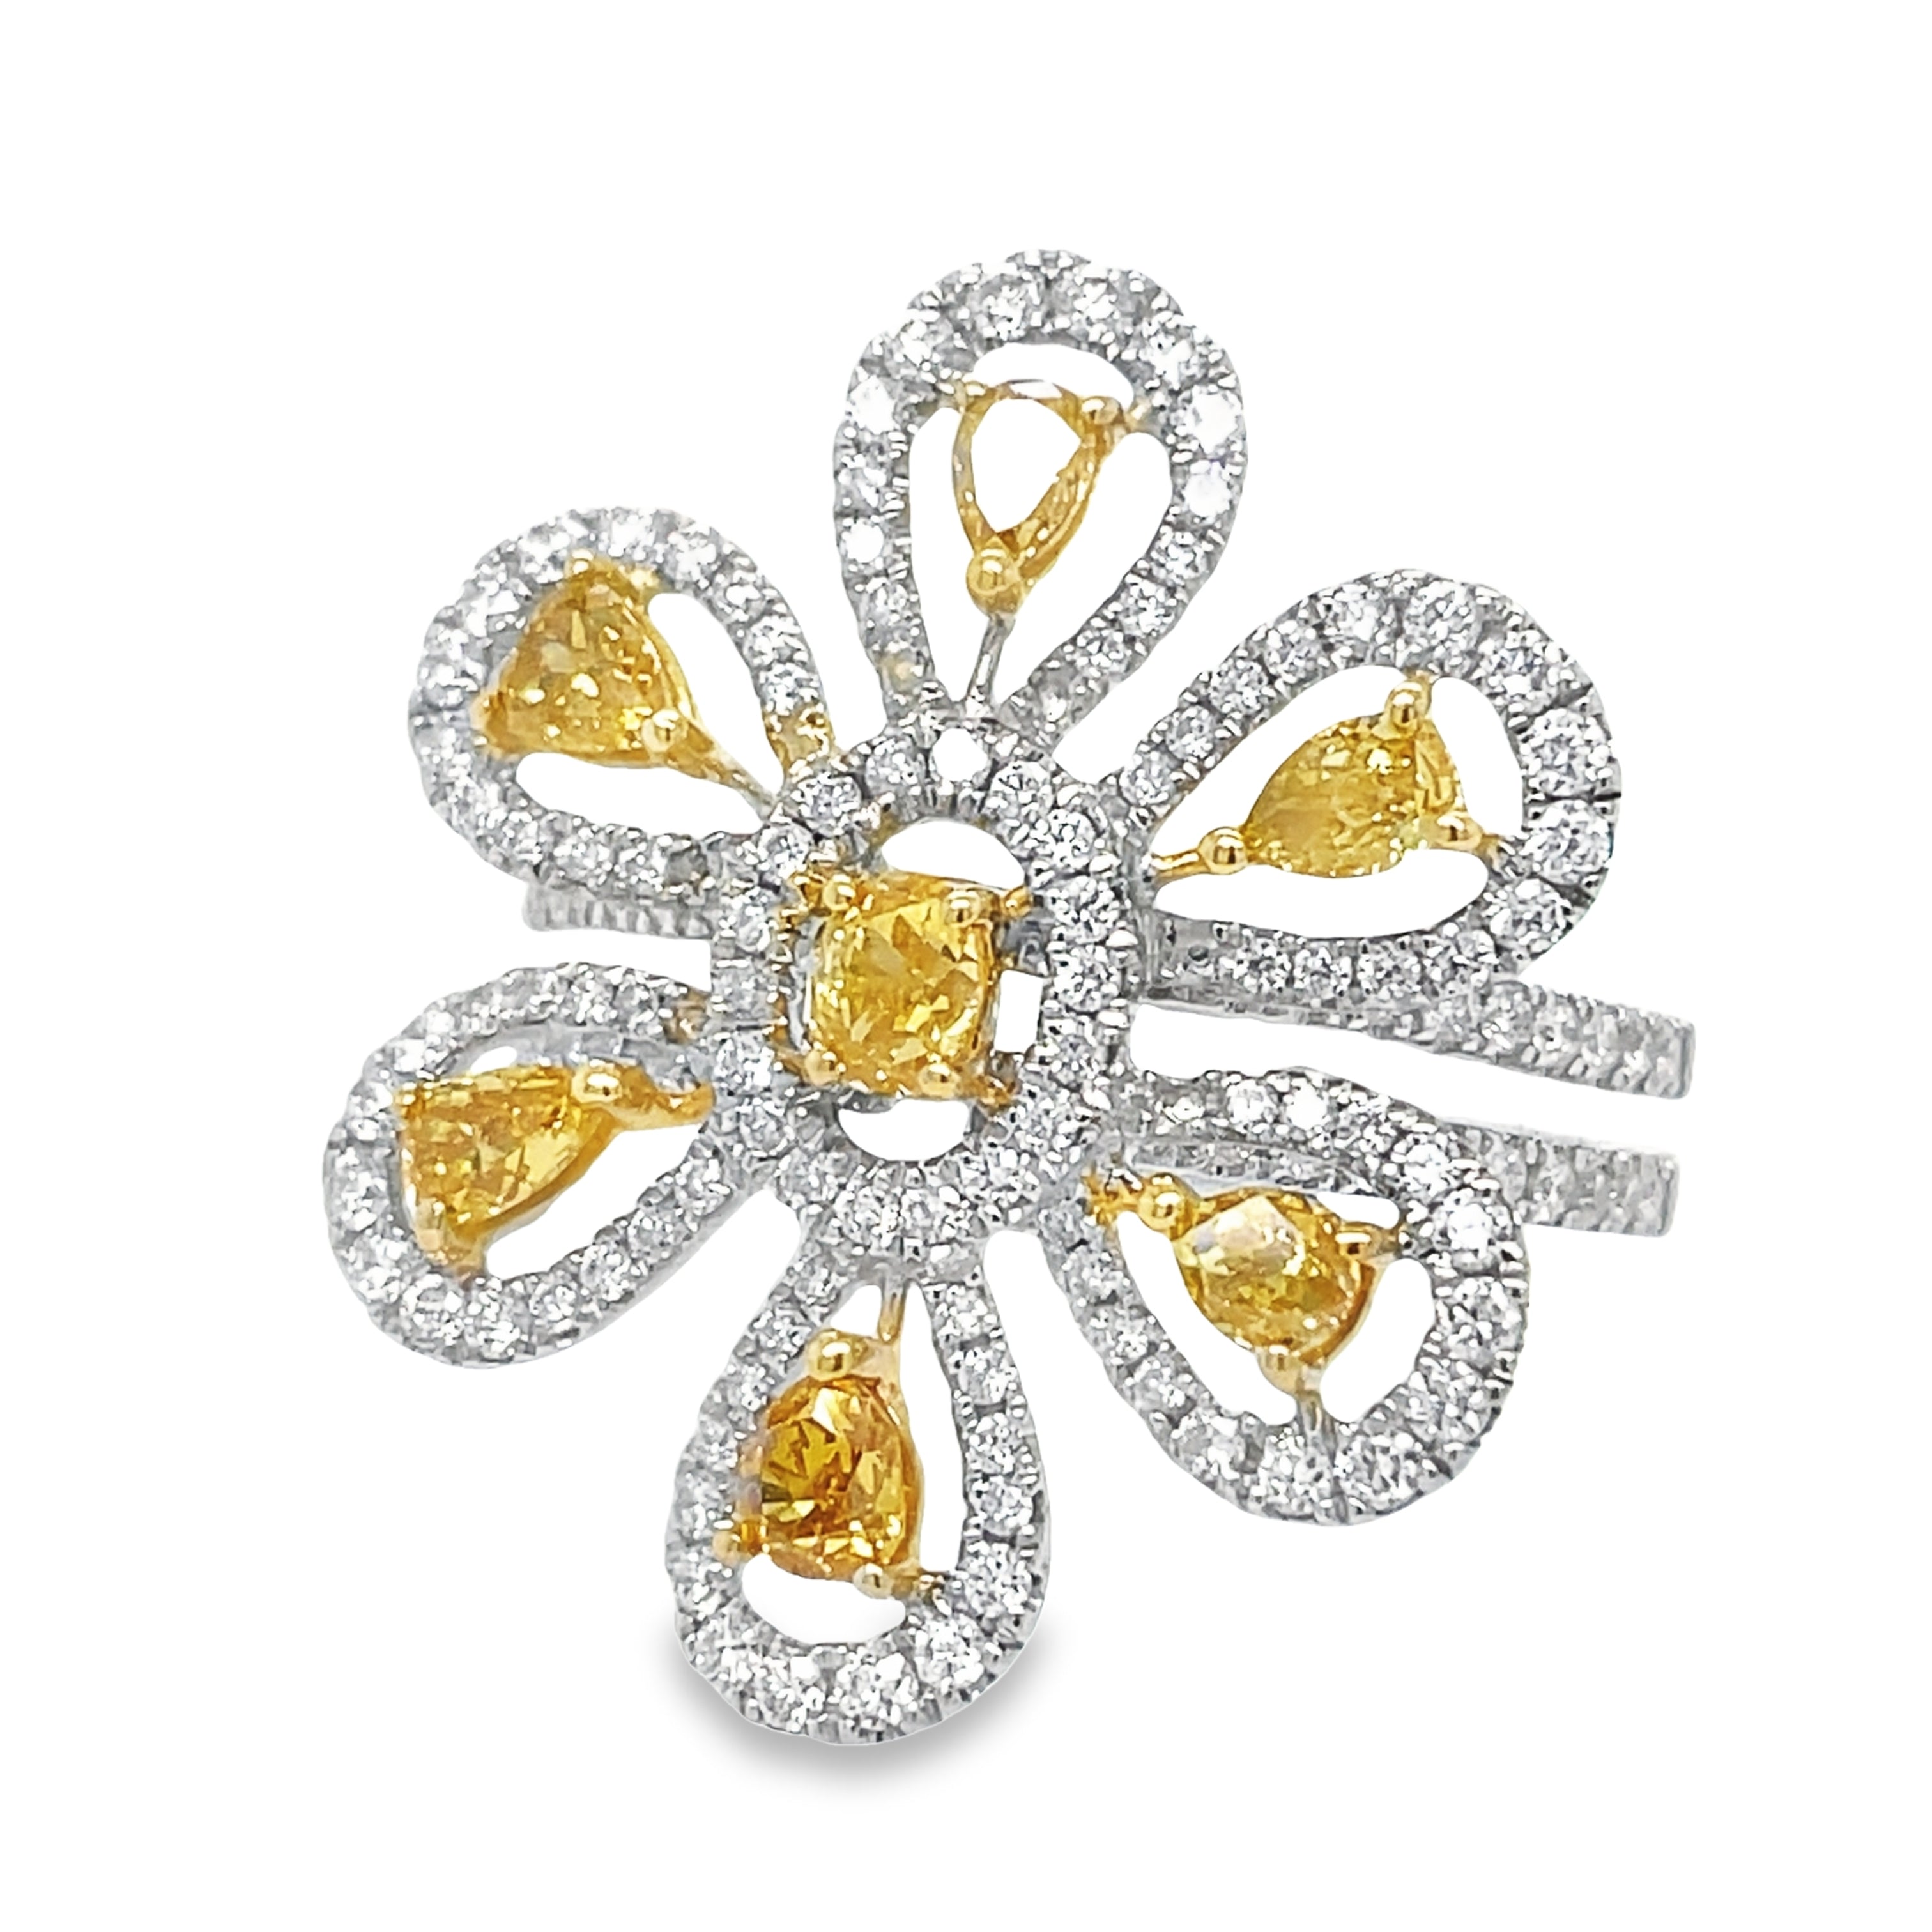 This exquisite cocktail ring features a stunning one-of-a-kind design, with a large diamond flower centerpiece surrounded by high-quality yellow diamonds 0.89 cts and round diamonds 0.82 cts. Crafted from 18k white gold, its double shank adds elegance and sparkle. Measuring 24.50 mm in width, this size 7 (sizeable) ring is a true statement piece.